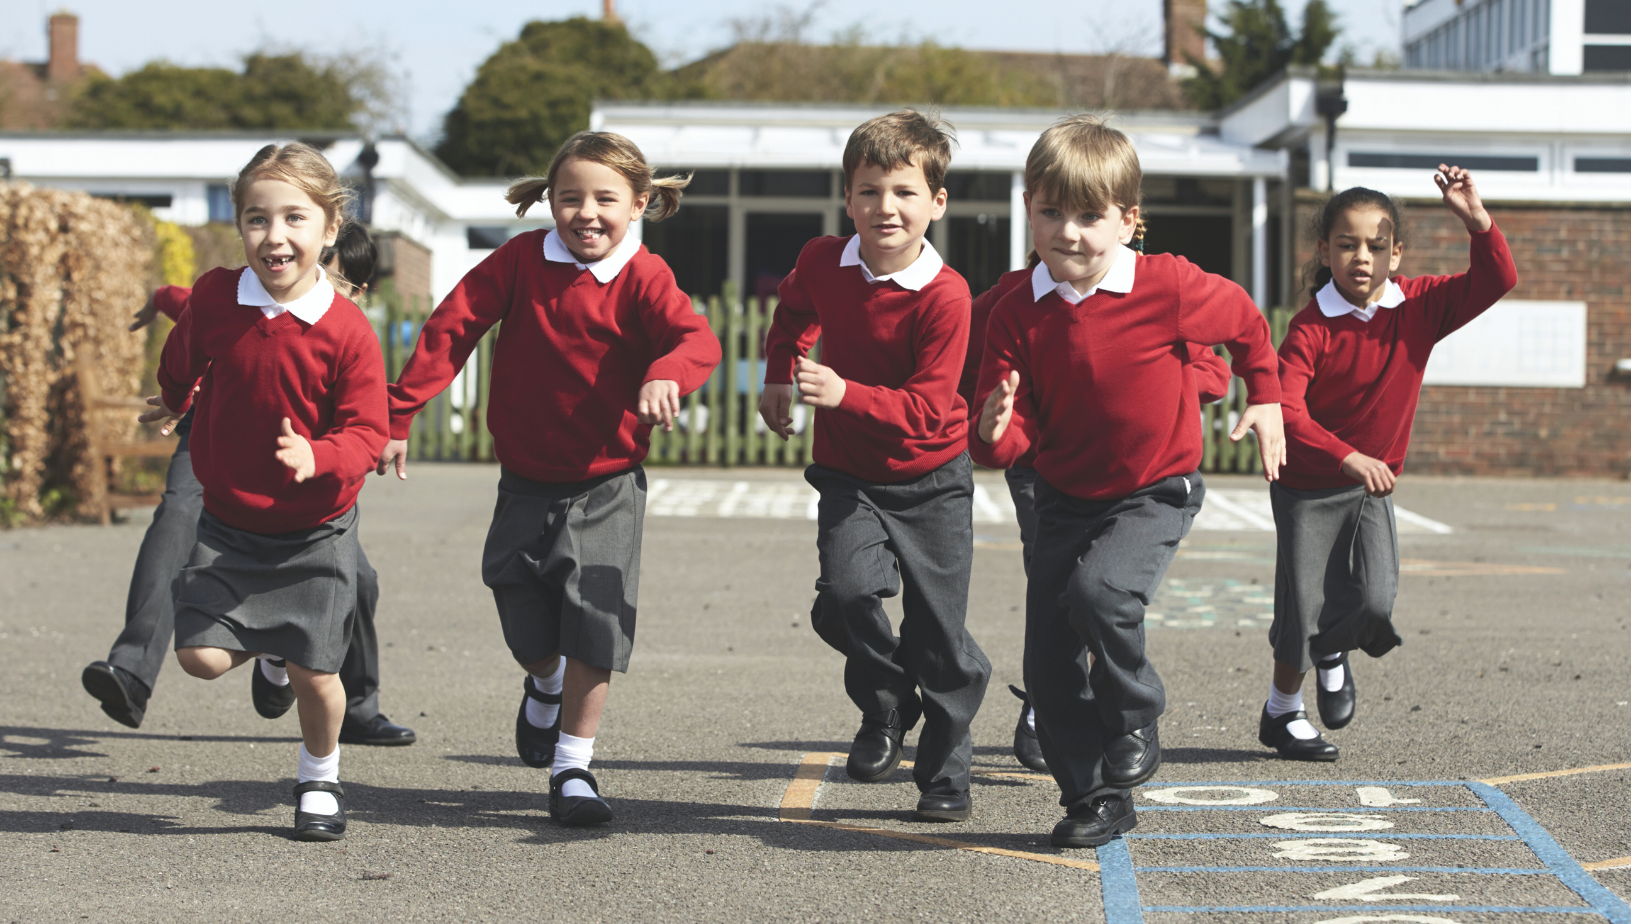 A group of school children running in the playground